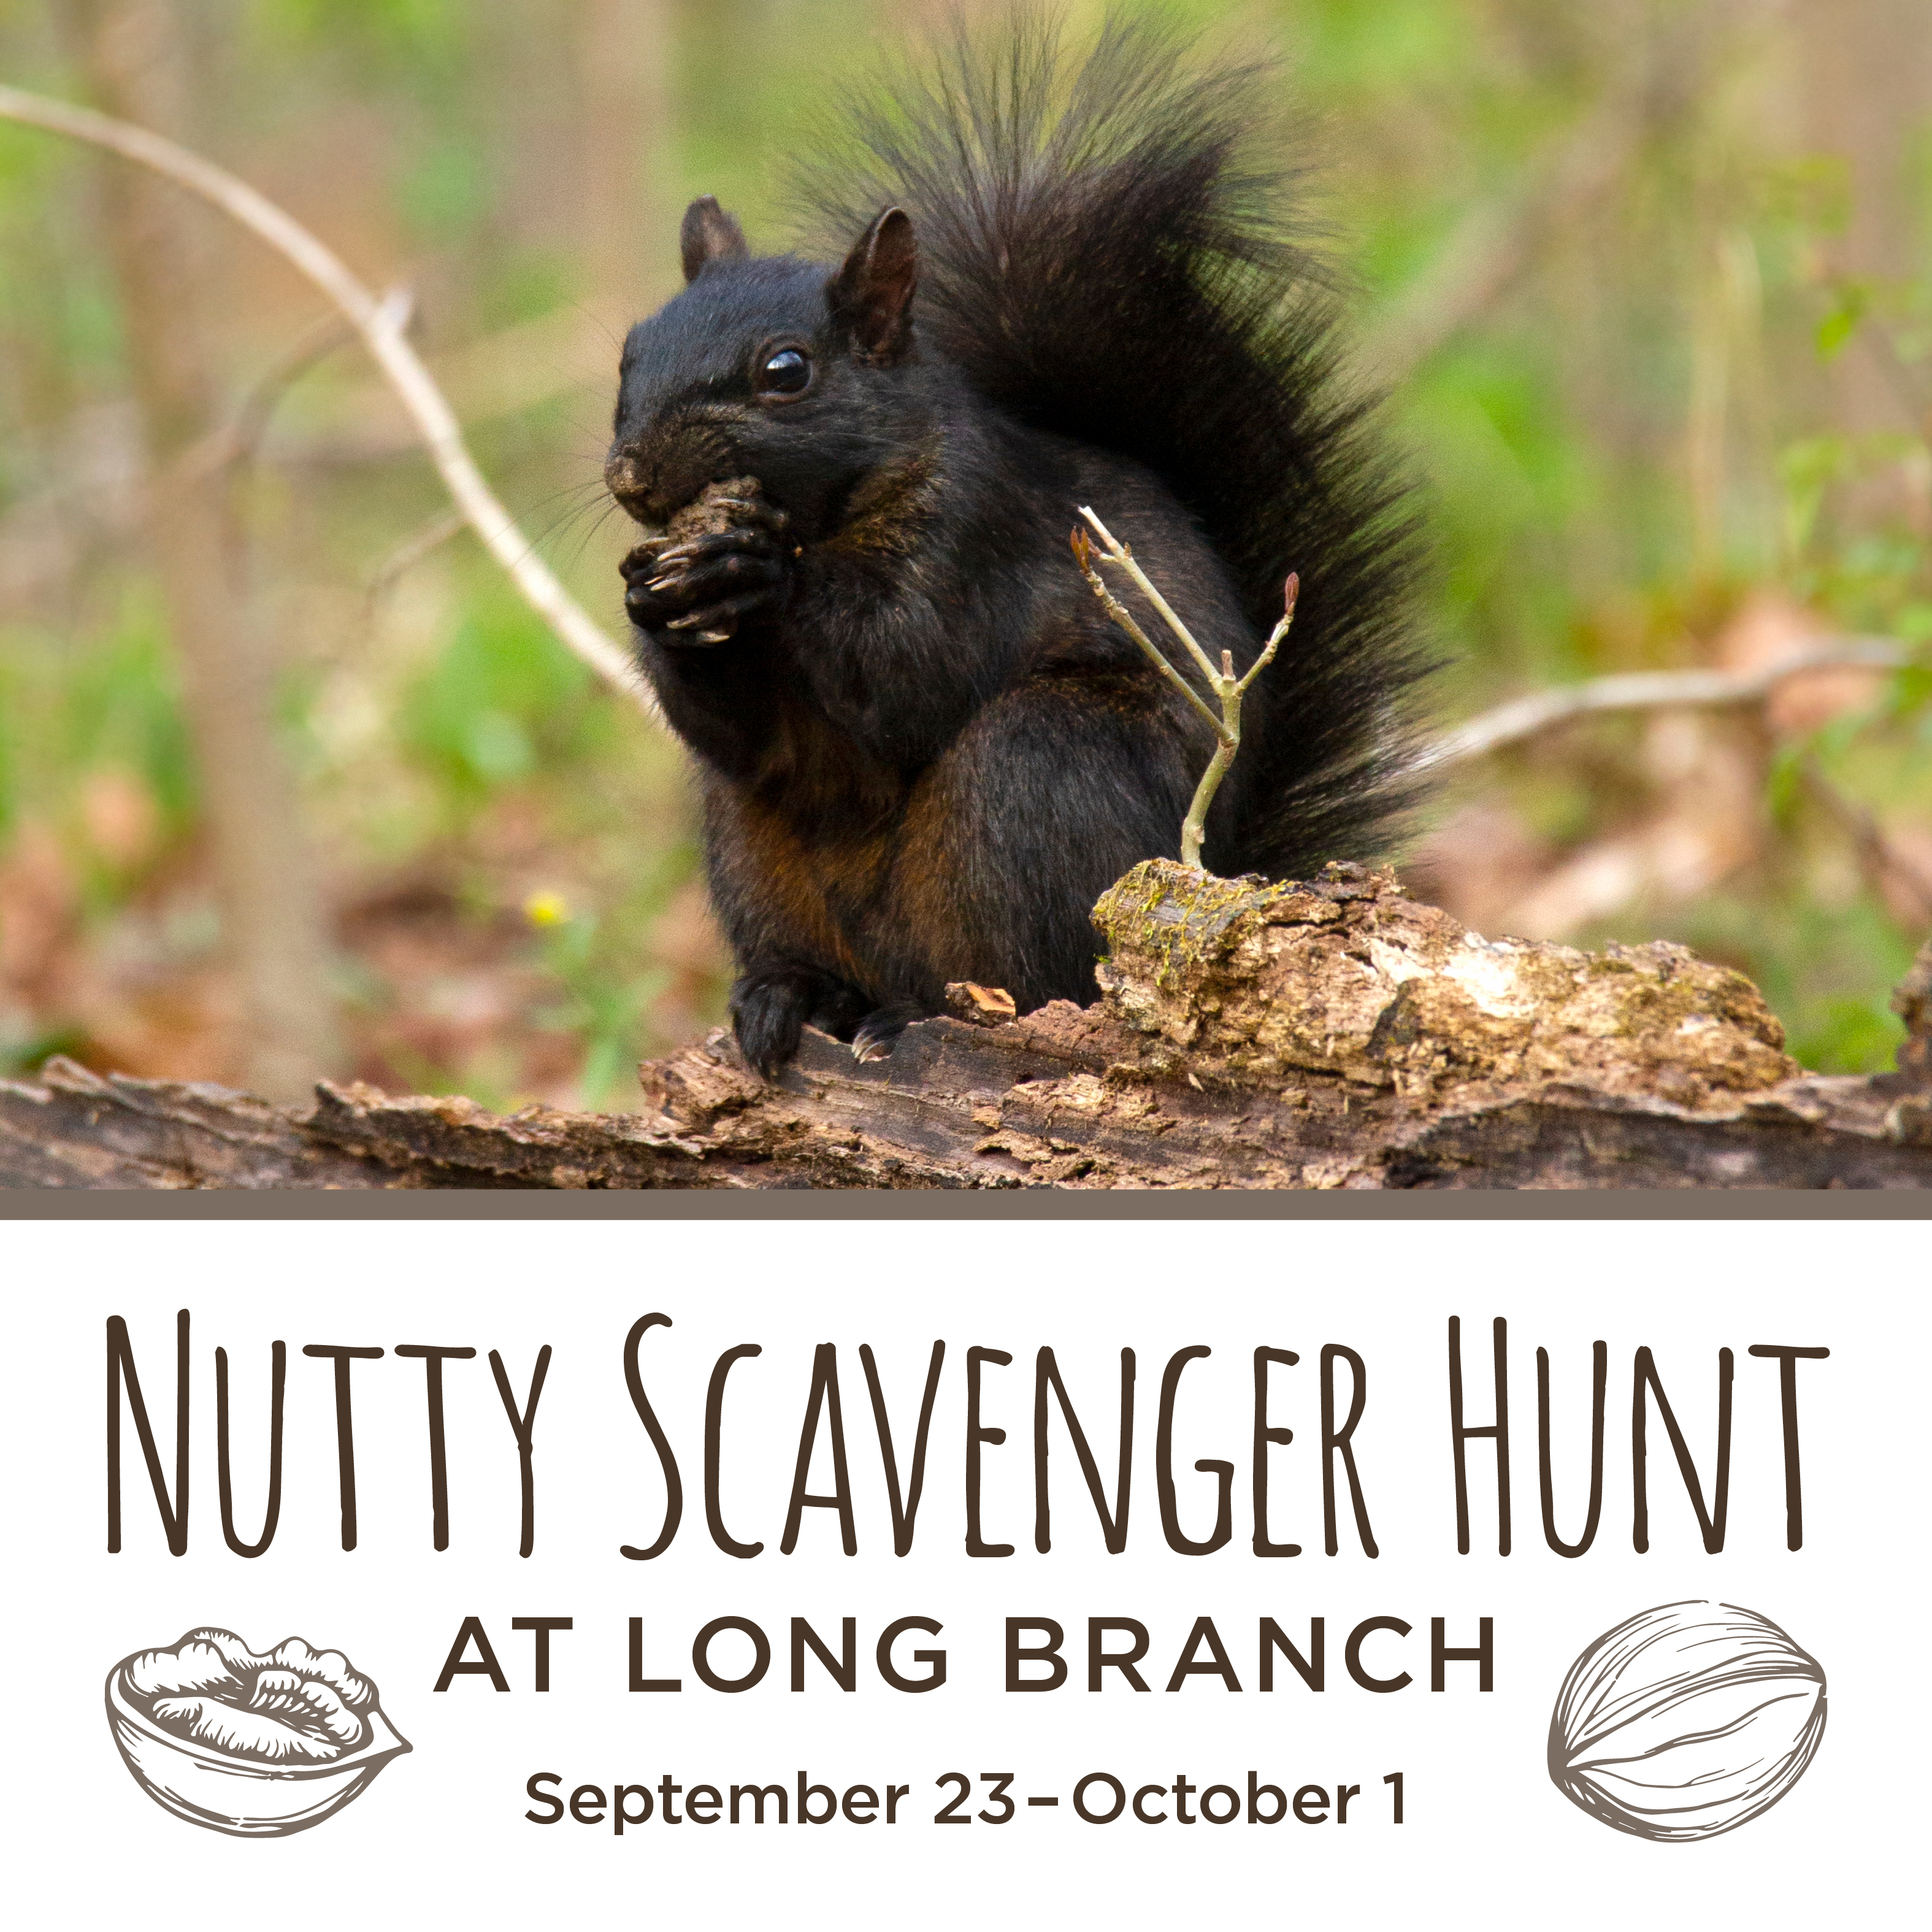 Picture of a squirrel eating a nut with copy reading Nutty Adventure Scavenger Hunt September 23-October 9